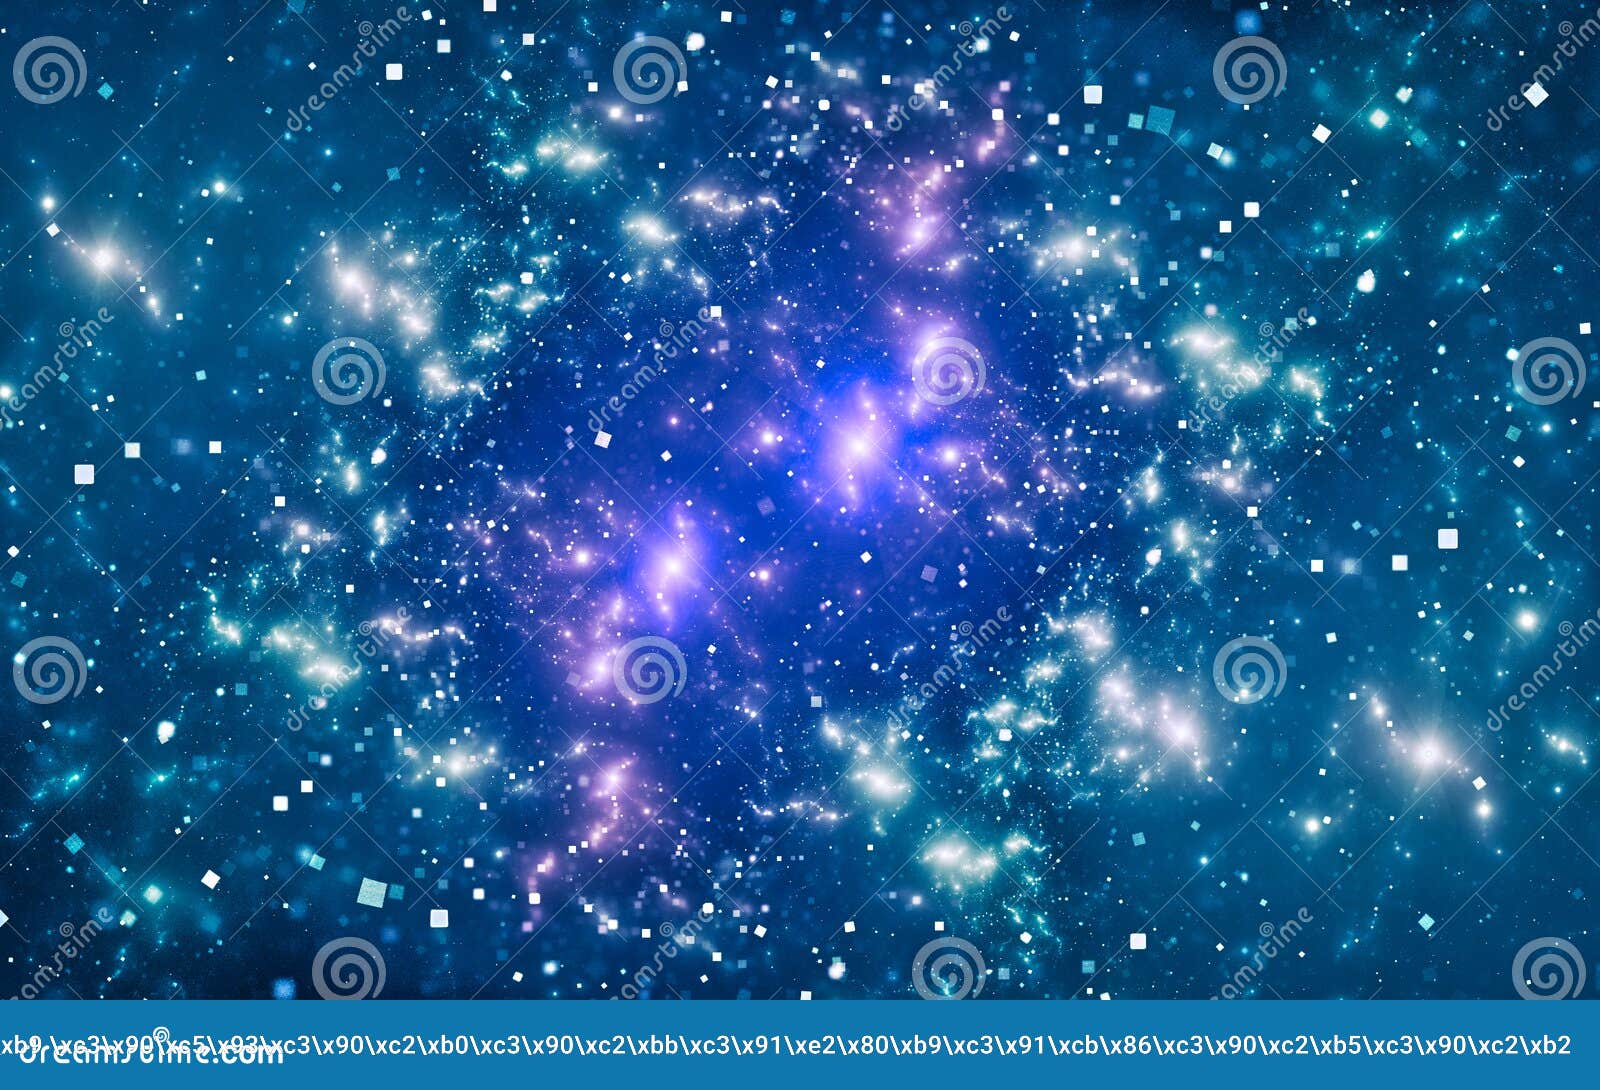 abstract  background image fantastic outer space with many colorful stars, nebulae, bright quasars in the background